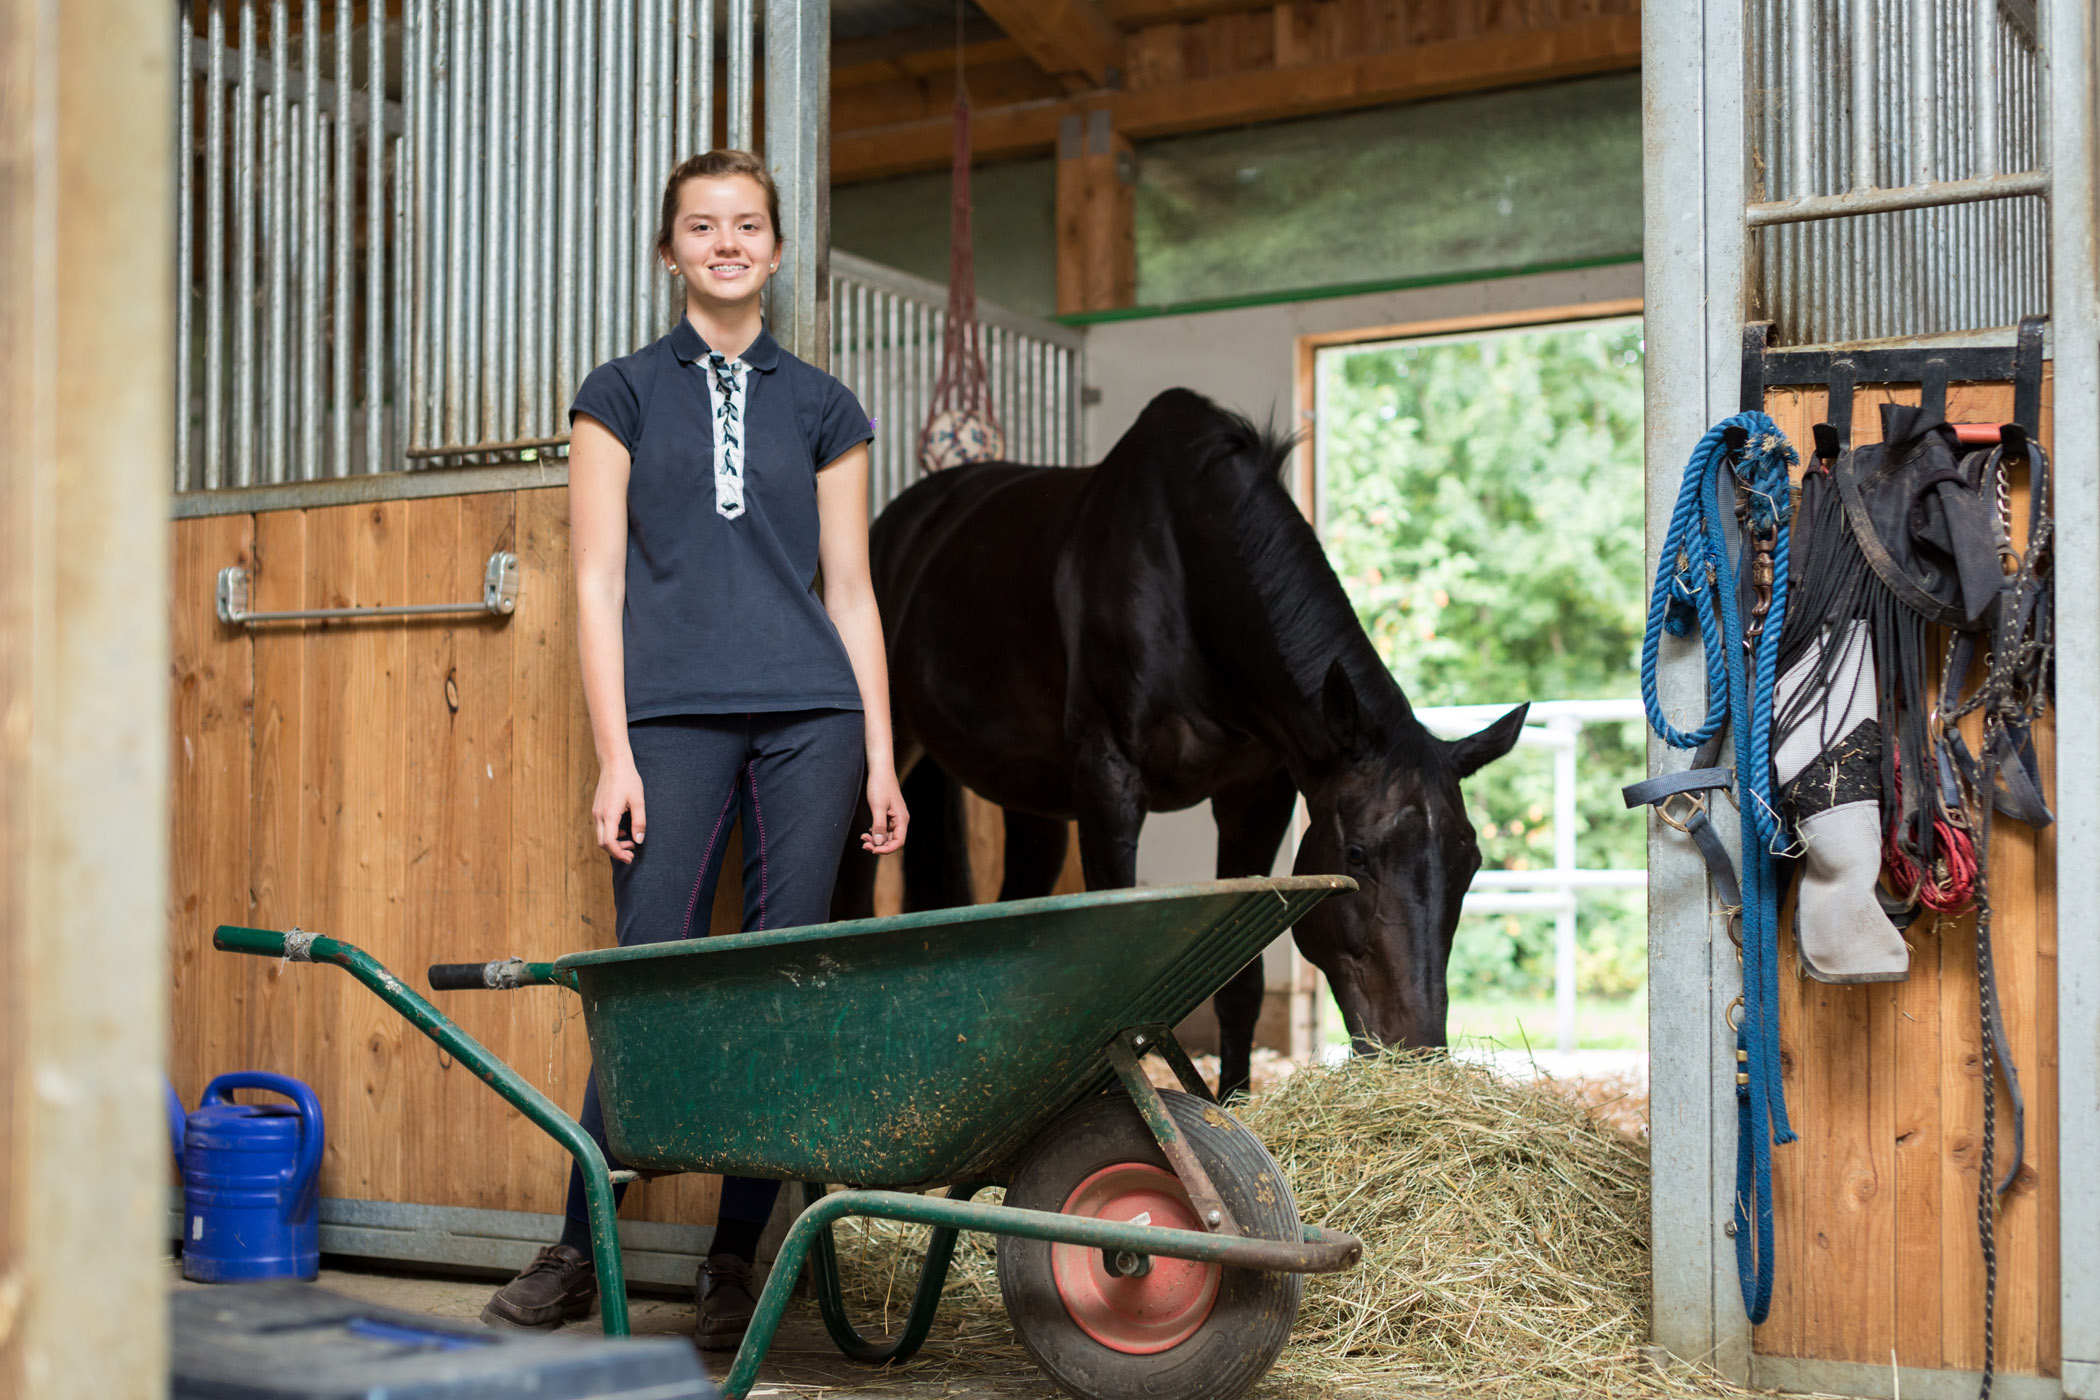 Girl standing next to a wheelbarrow in a stable doing horse chores.